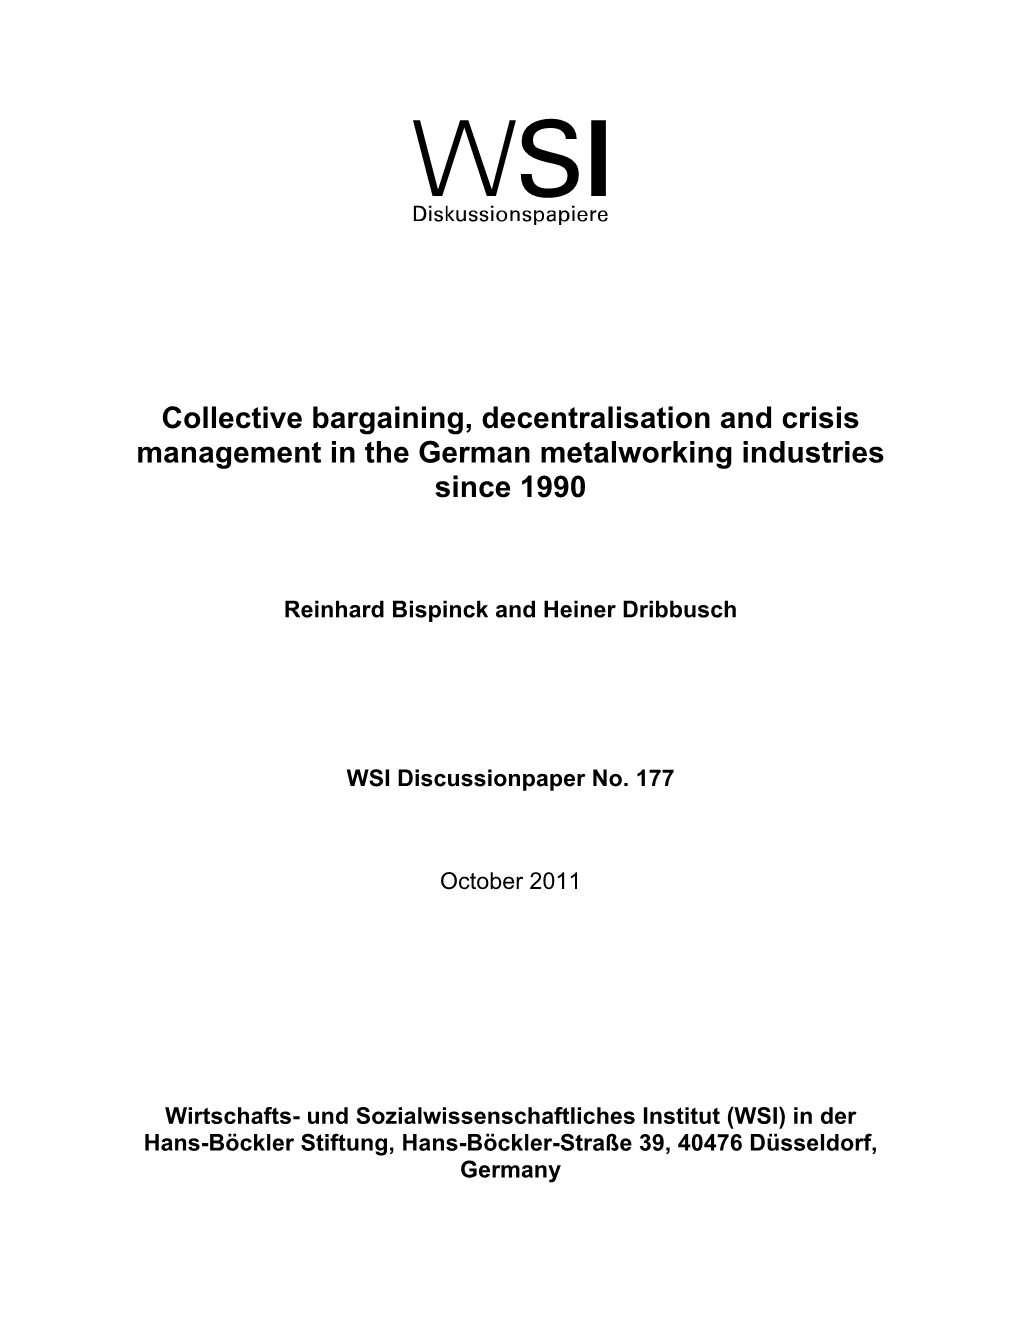 Collective Bargaining, Decentralisation and Crisis Management in the German Metalworking Industries Since 1990